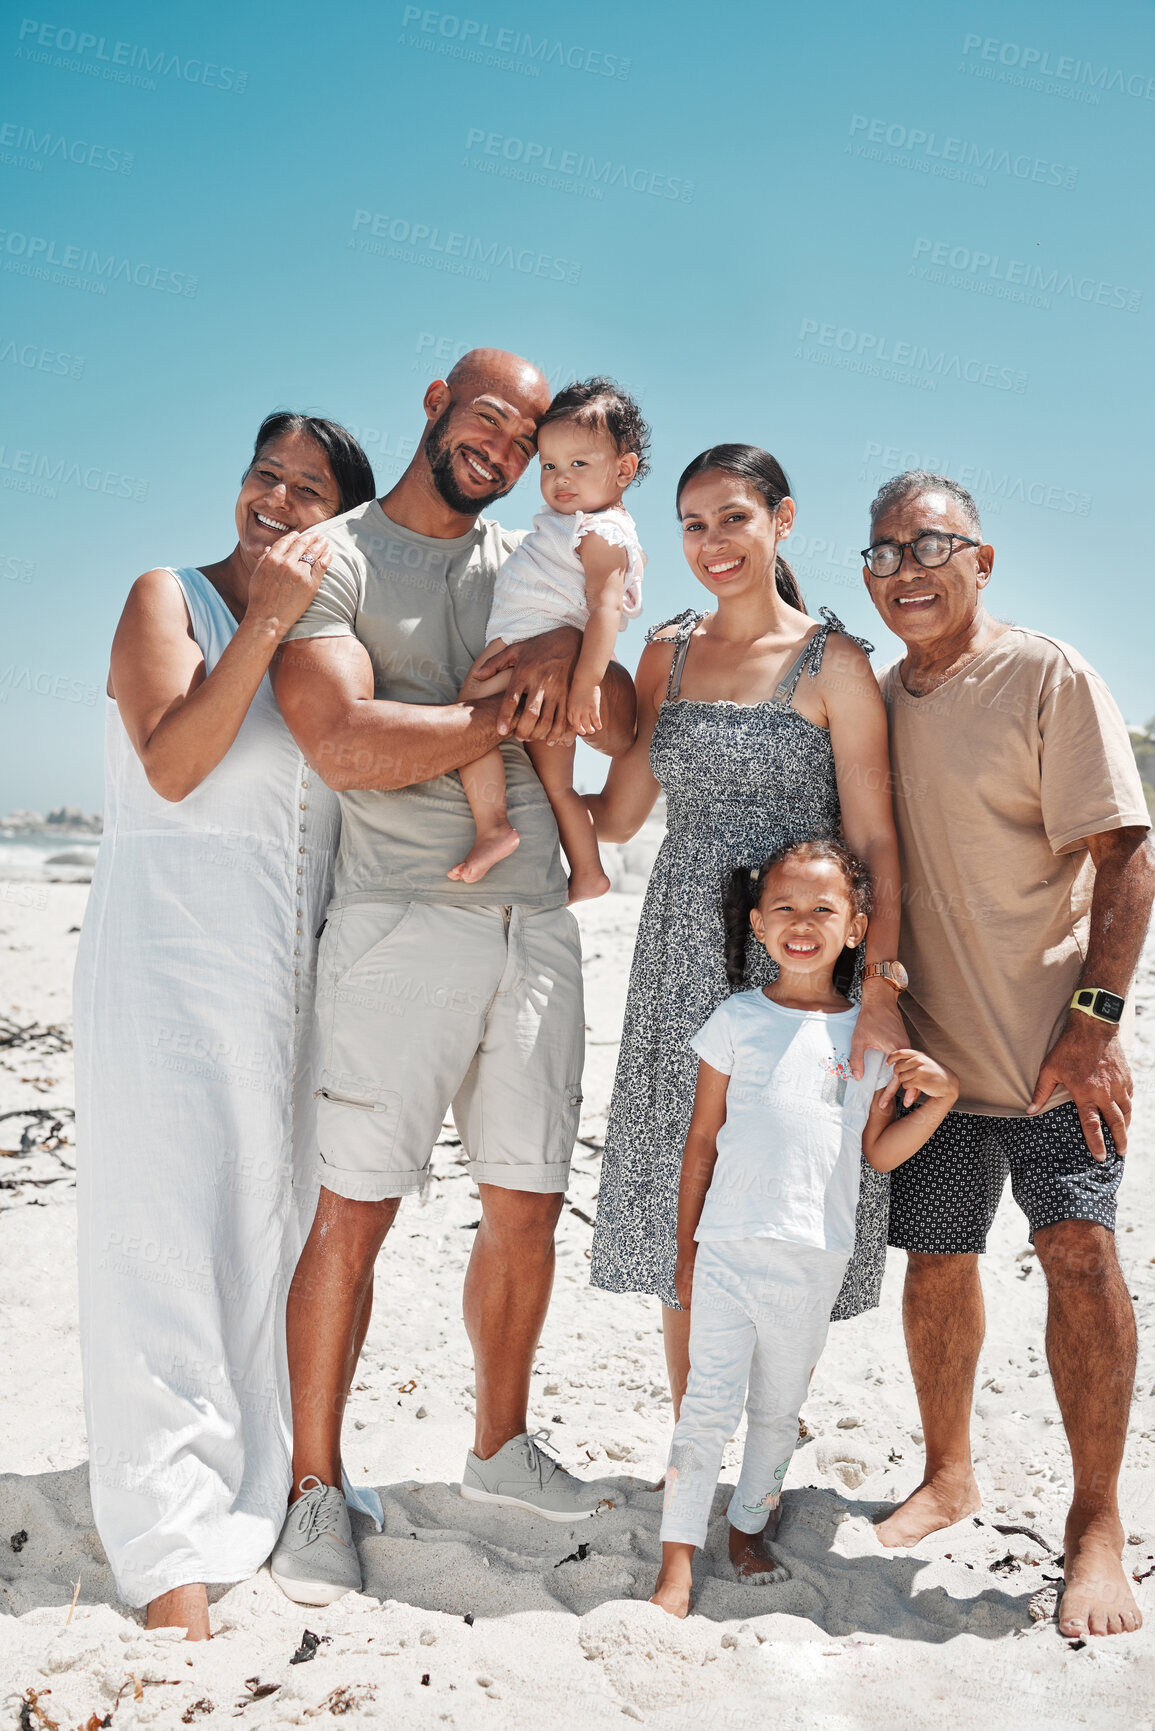 Buy stock photo Big family, portrait and smile on beach holiday, vacation or Mexico summer trip. Generations, parents and children on sandy, sea or ocean shore having fun, bonding and spending quality time together.